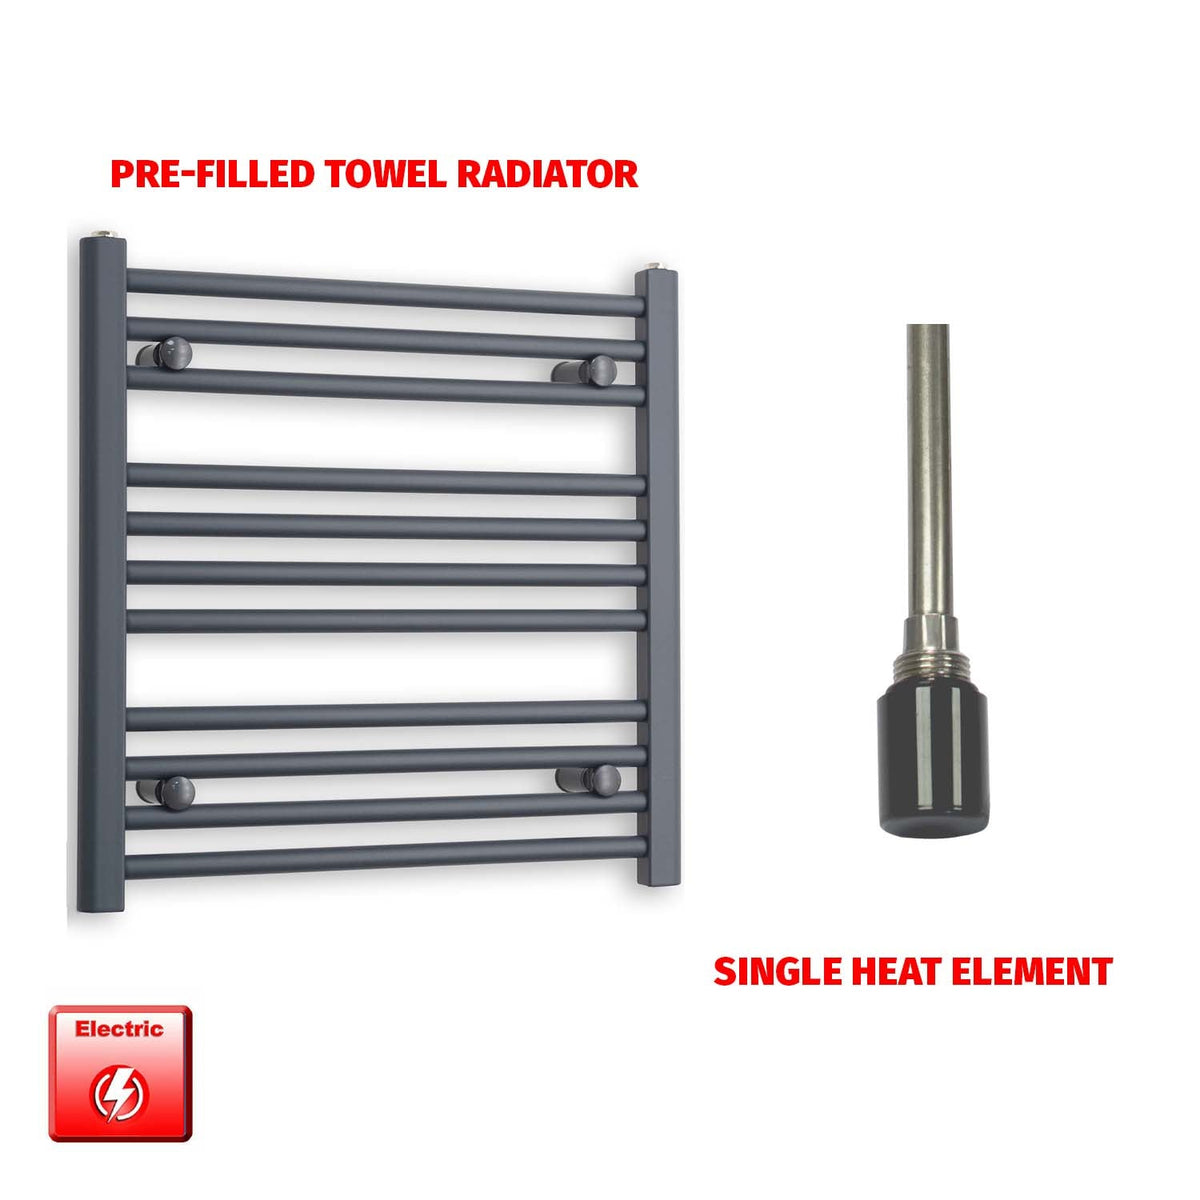 600mm High 600mm Wide Flat Anthracite Pre-Filled Electric Heated Towel Rail Radiator HTR  Single heat element no timer